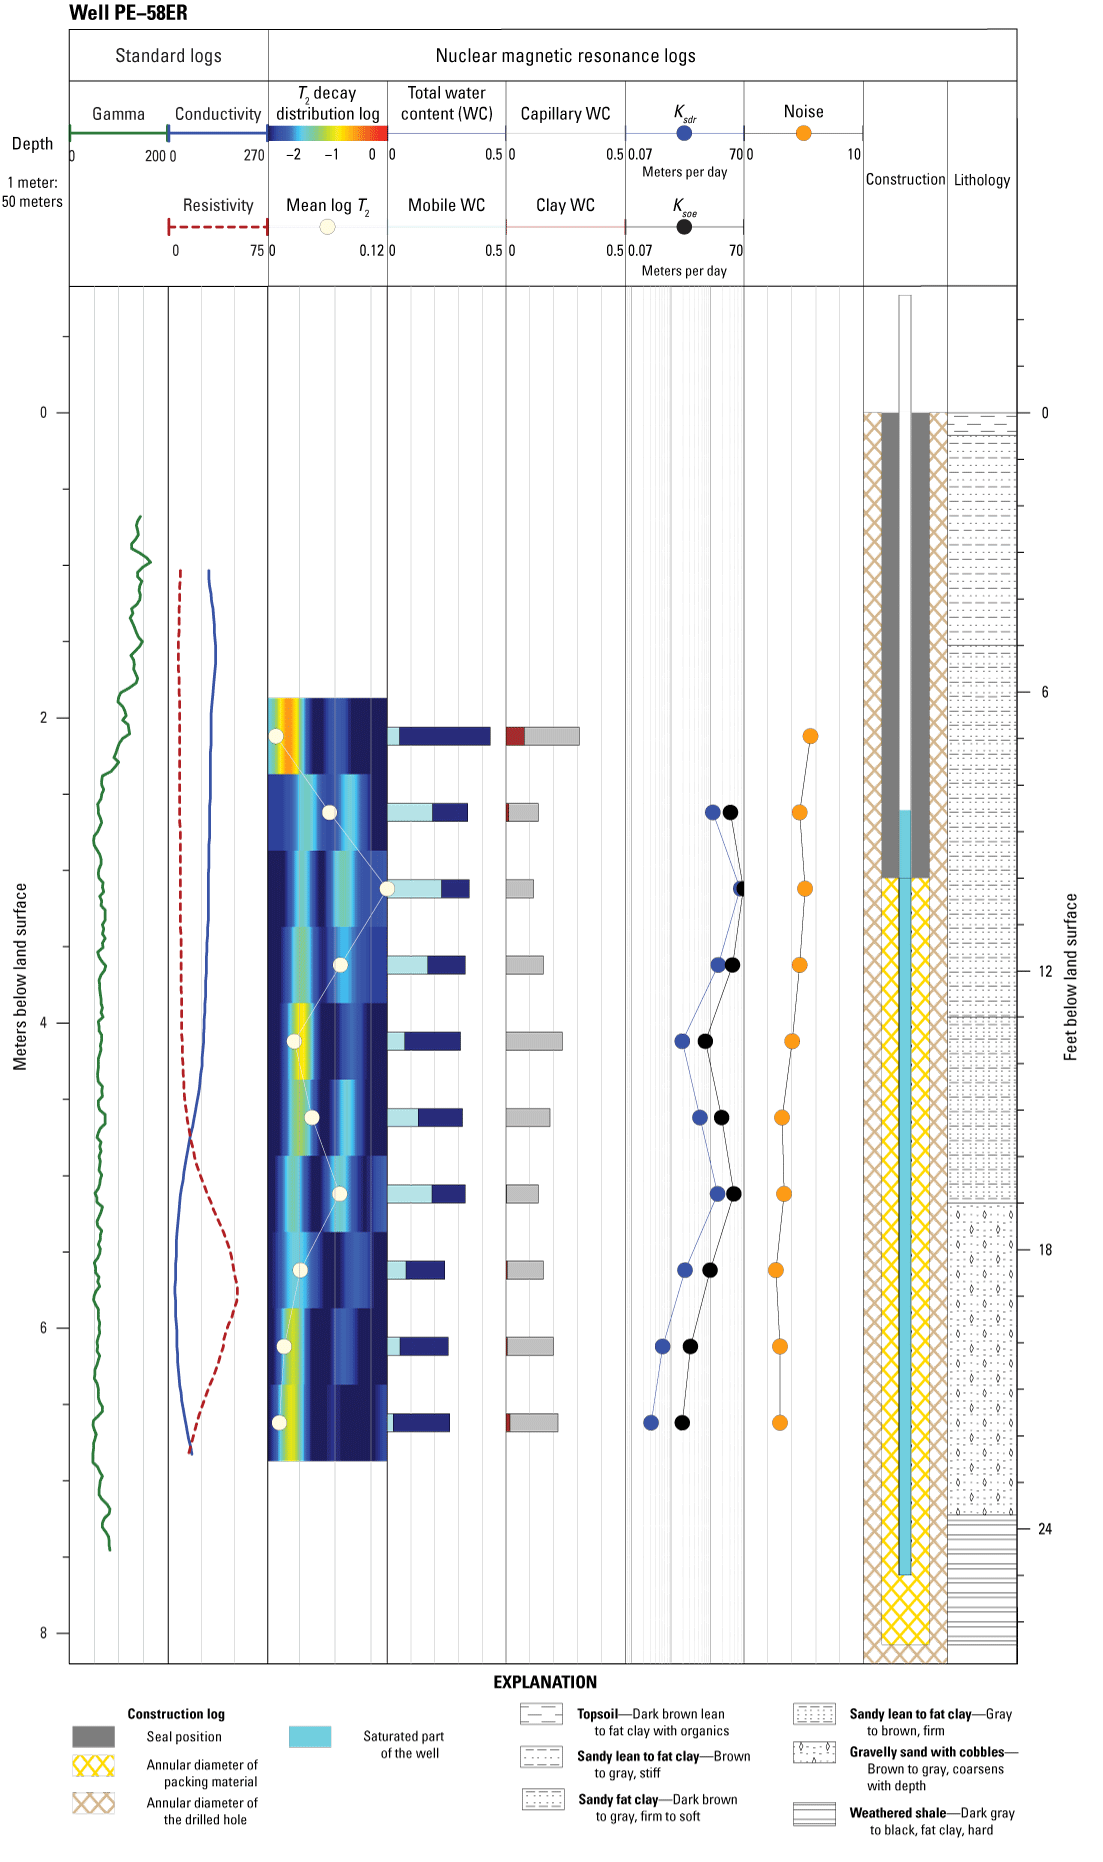 Borehole geophysical log for well PE–58ER showing standard logs (natural gamma, electrical
                        conductivity, and electrical resistivity), borehole nuclear magnetic resonance logs,
                        well construction, and lithology at depths (in meters and feet) below land surface.